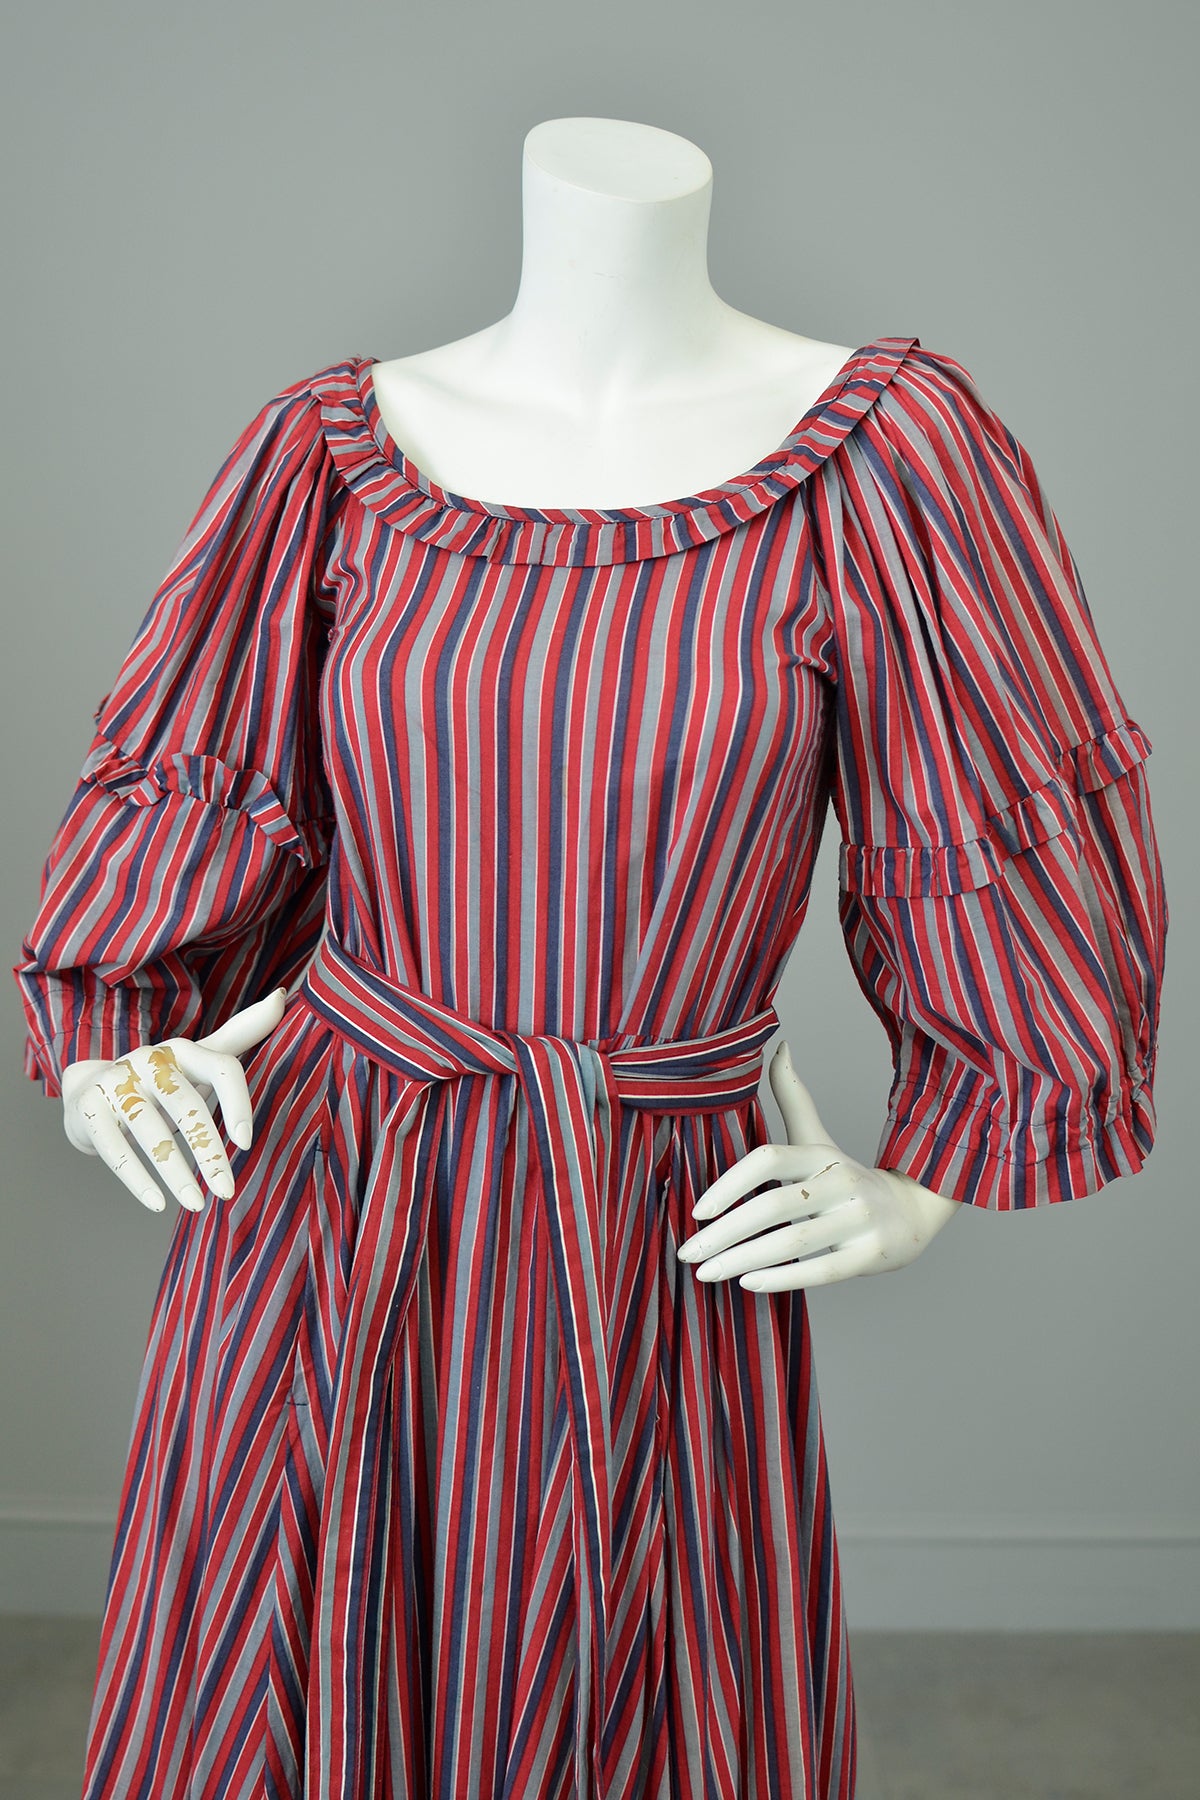 1980s Striped Cotton Peasant Dress with Puffy Bell Sleeves and Tiered Skirt by Laura Ashley